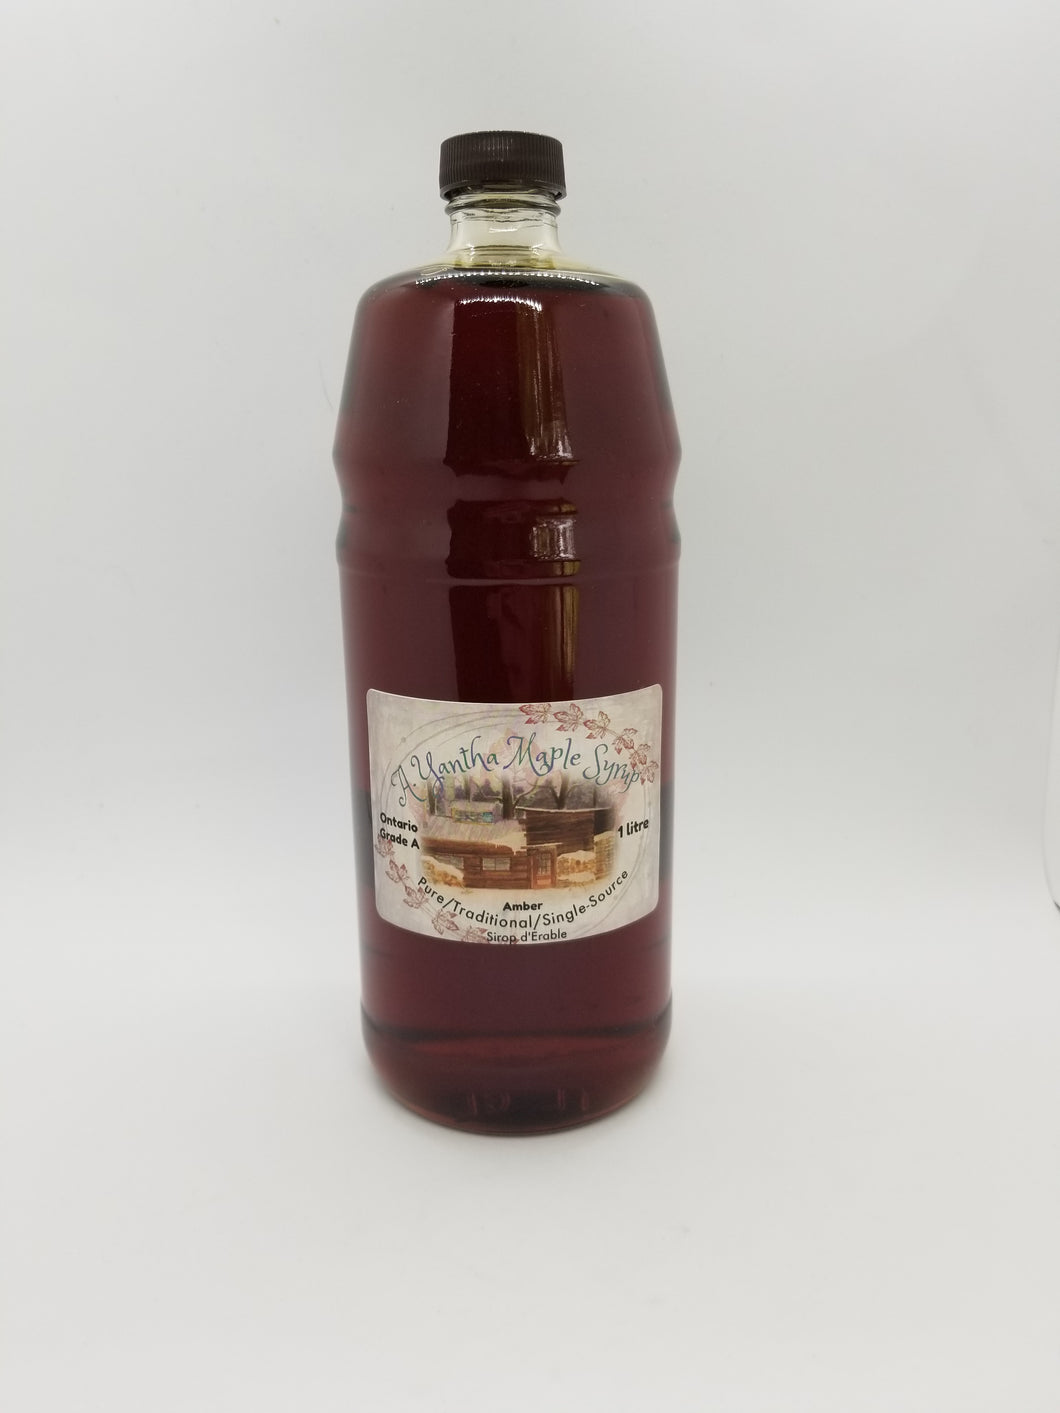 Yantha's Maple Syrup - 1L Grand Glass Bottle